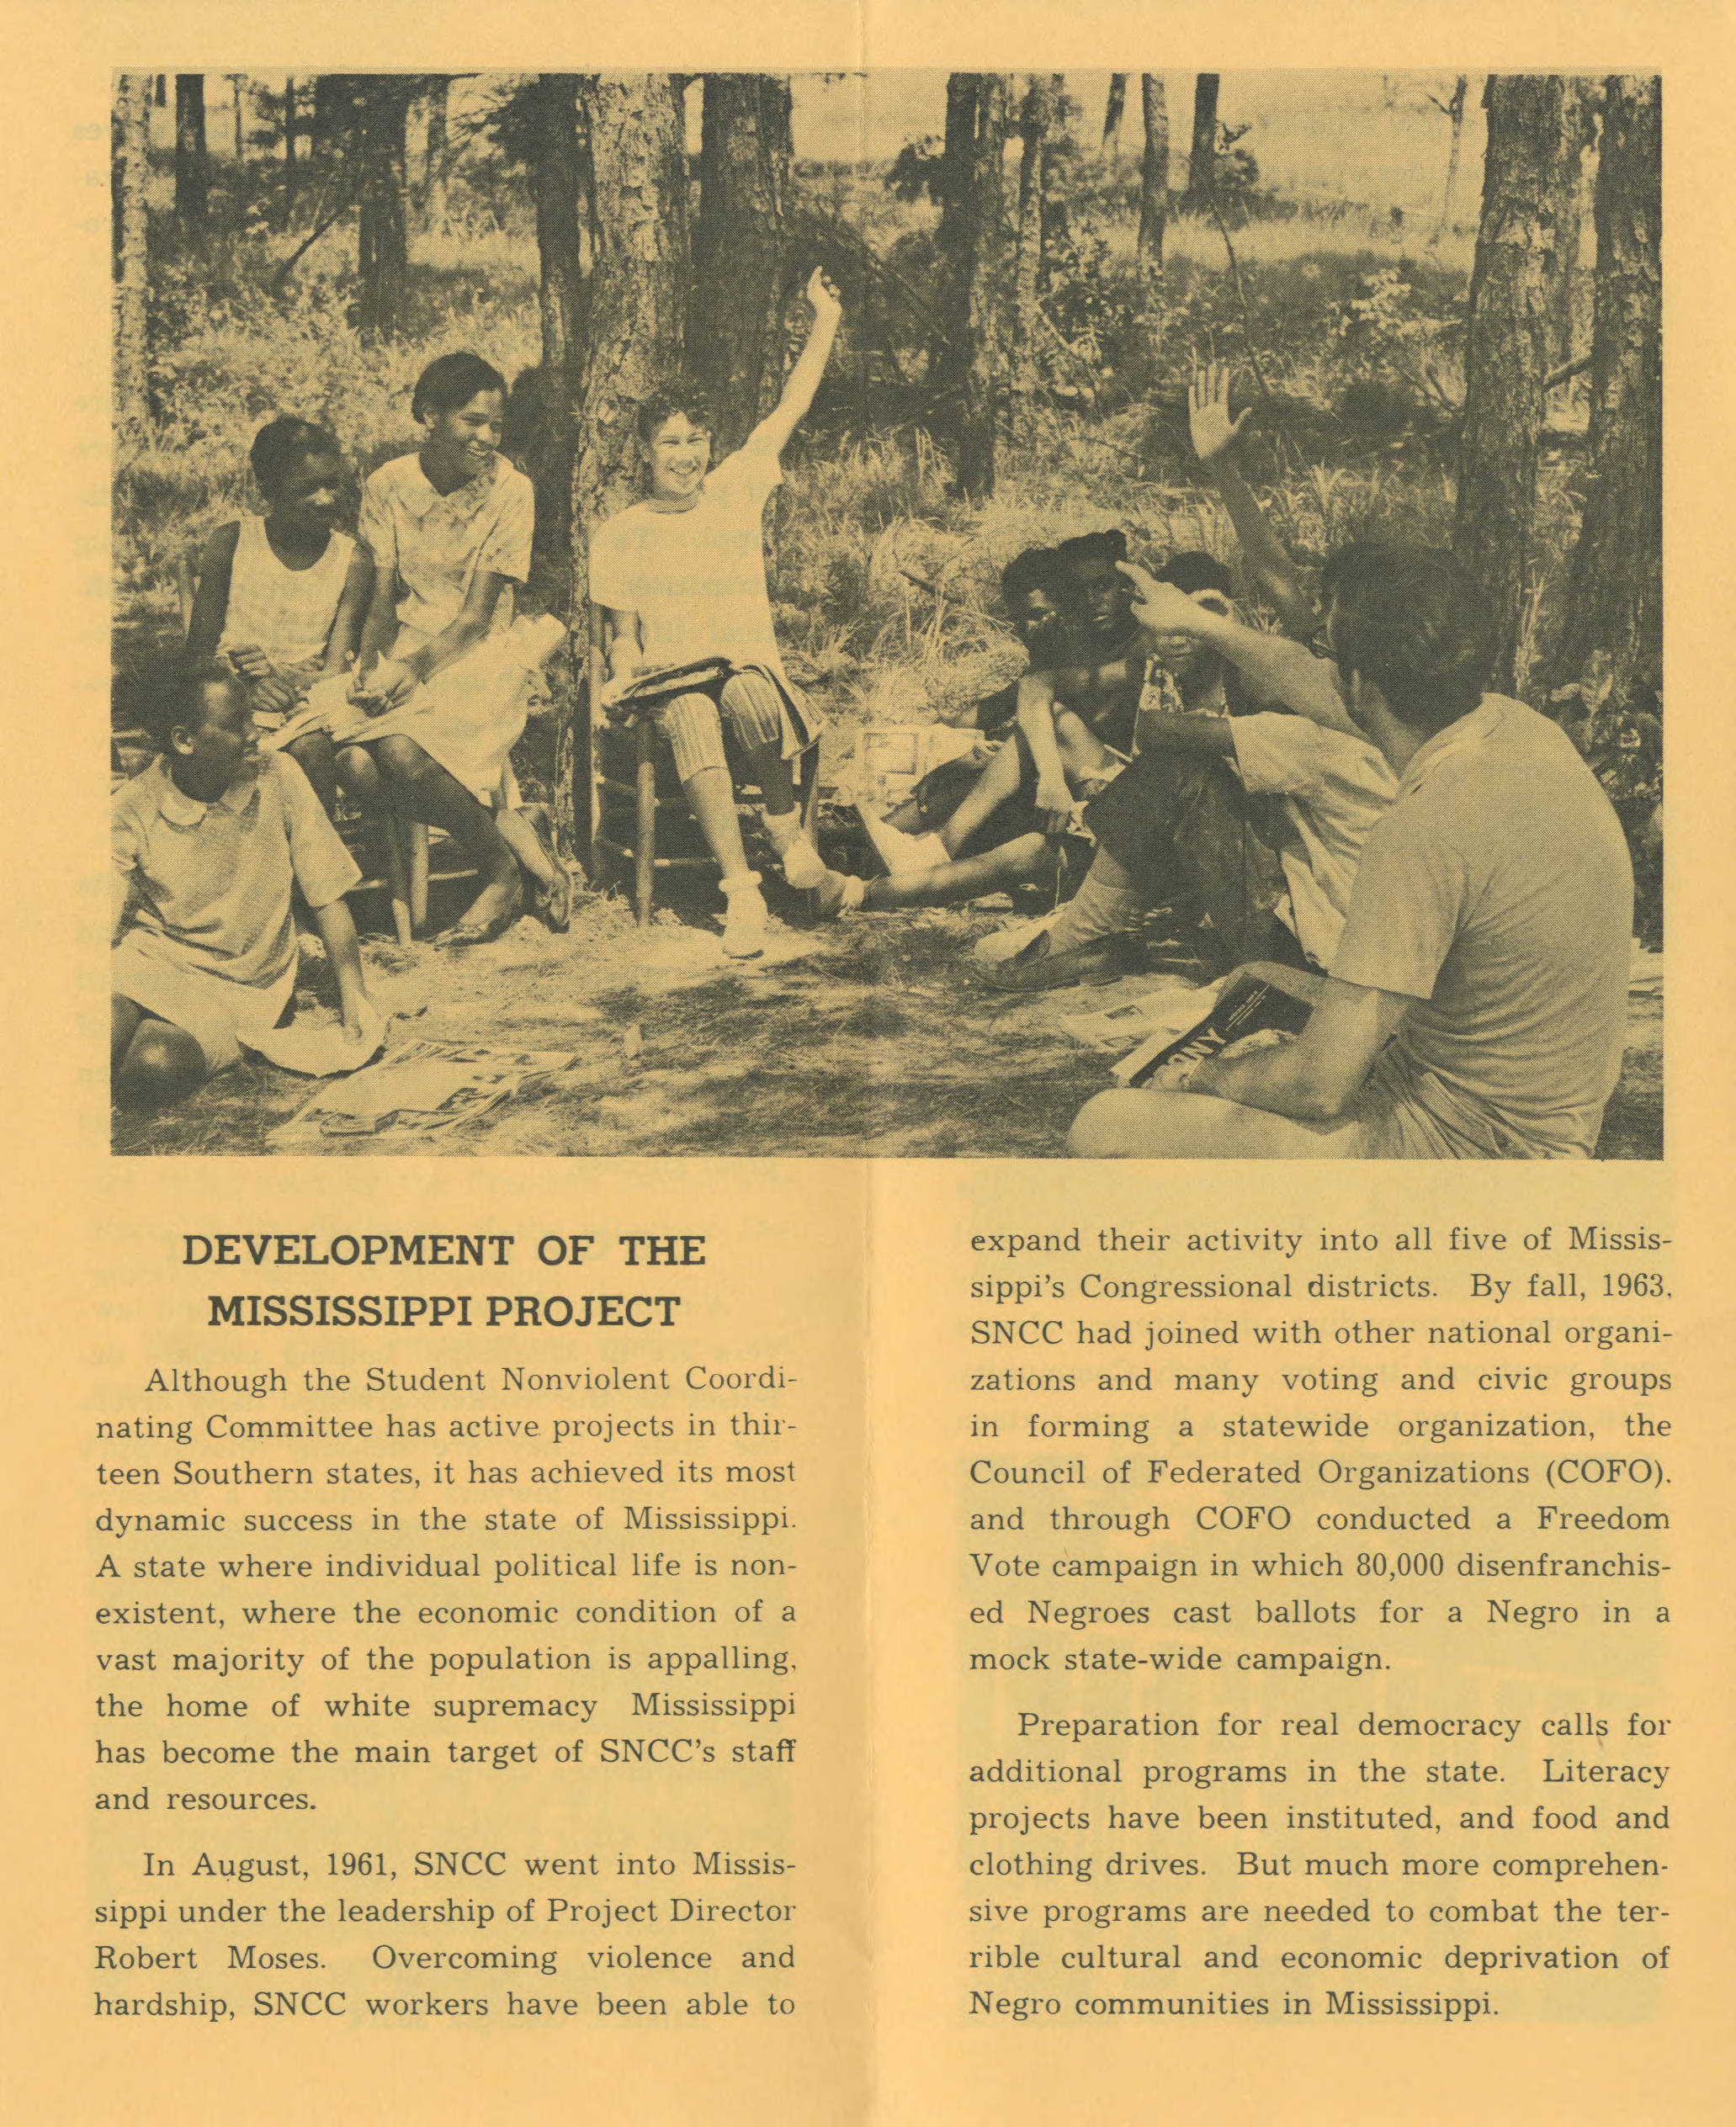 Page 2 of the Mississippi Freedom Project Pamphlet